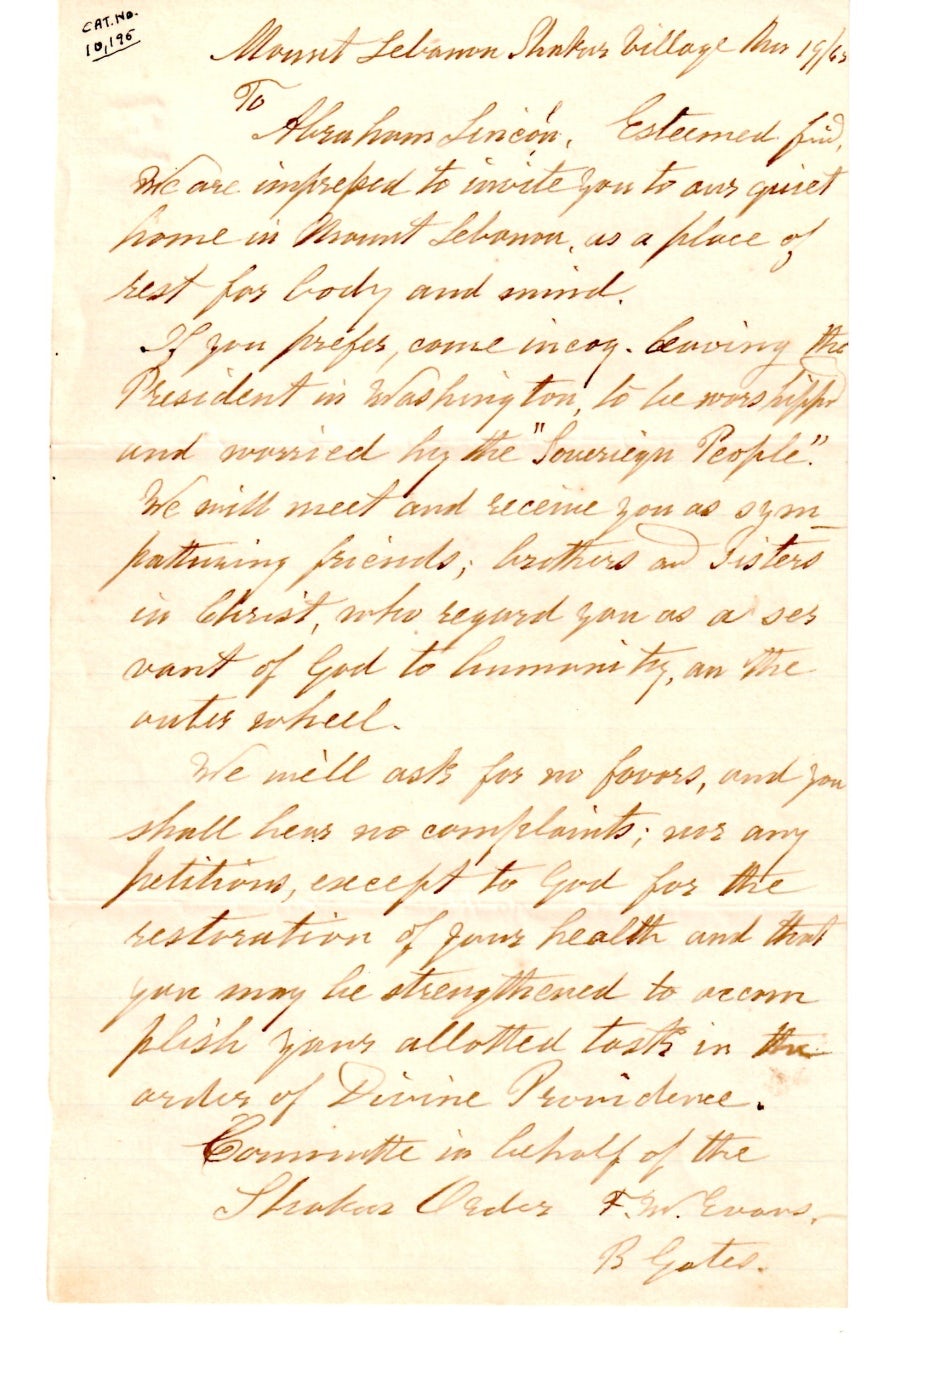 Letter to President Abraham Lincoln inviting him to Mount Lebanon from Elder Frederick W. Evans and Brother Benjamin, dated March 19, 1865, shortly before the President's assassination, Collection of the Shaker Museum 